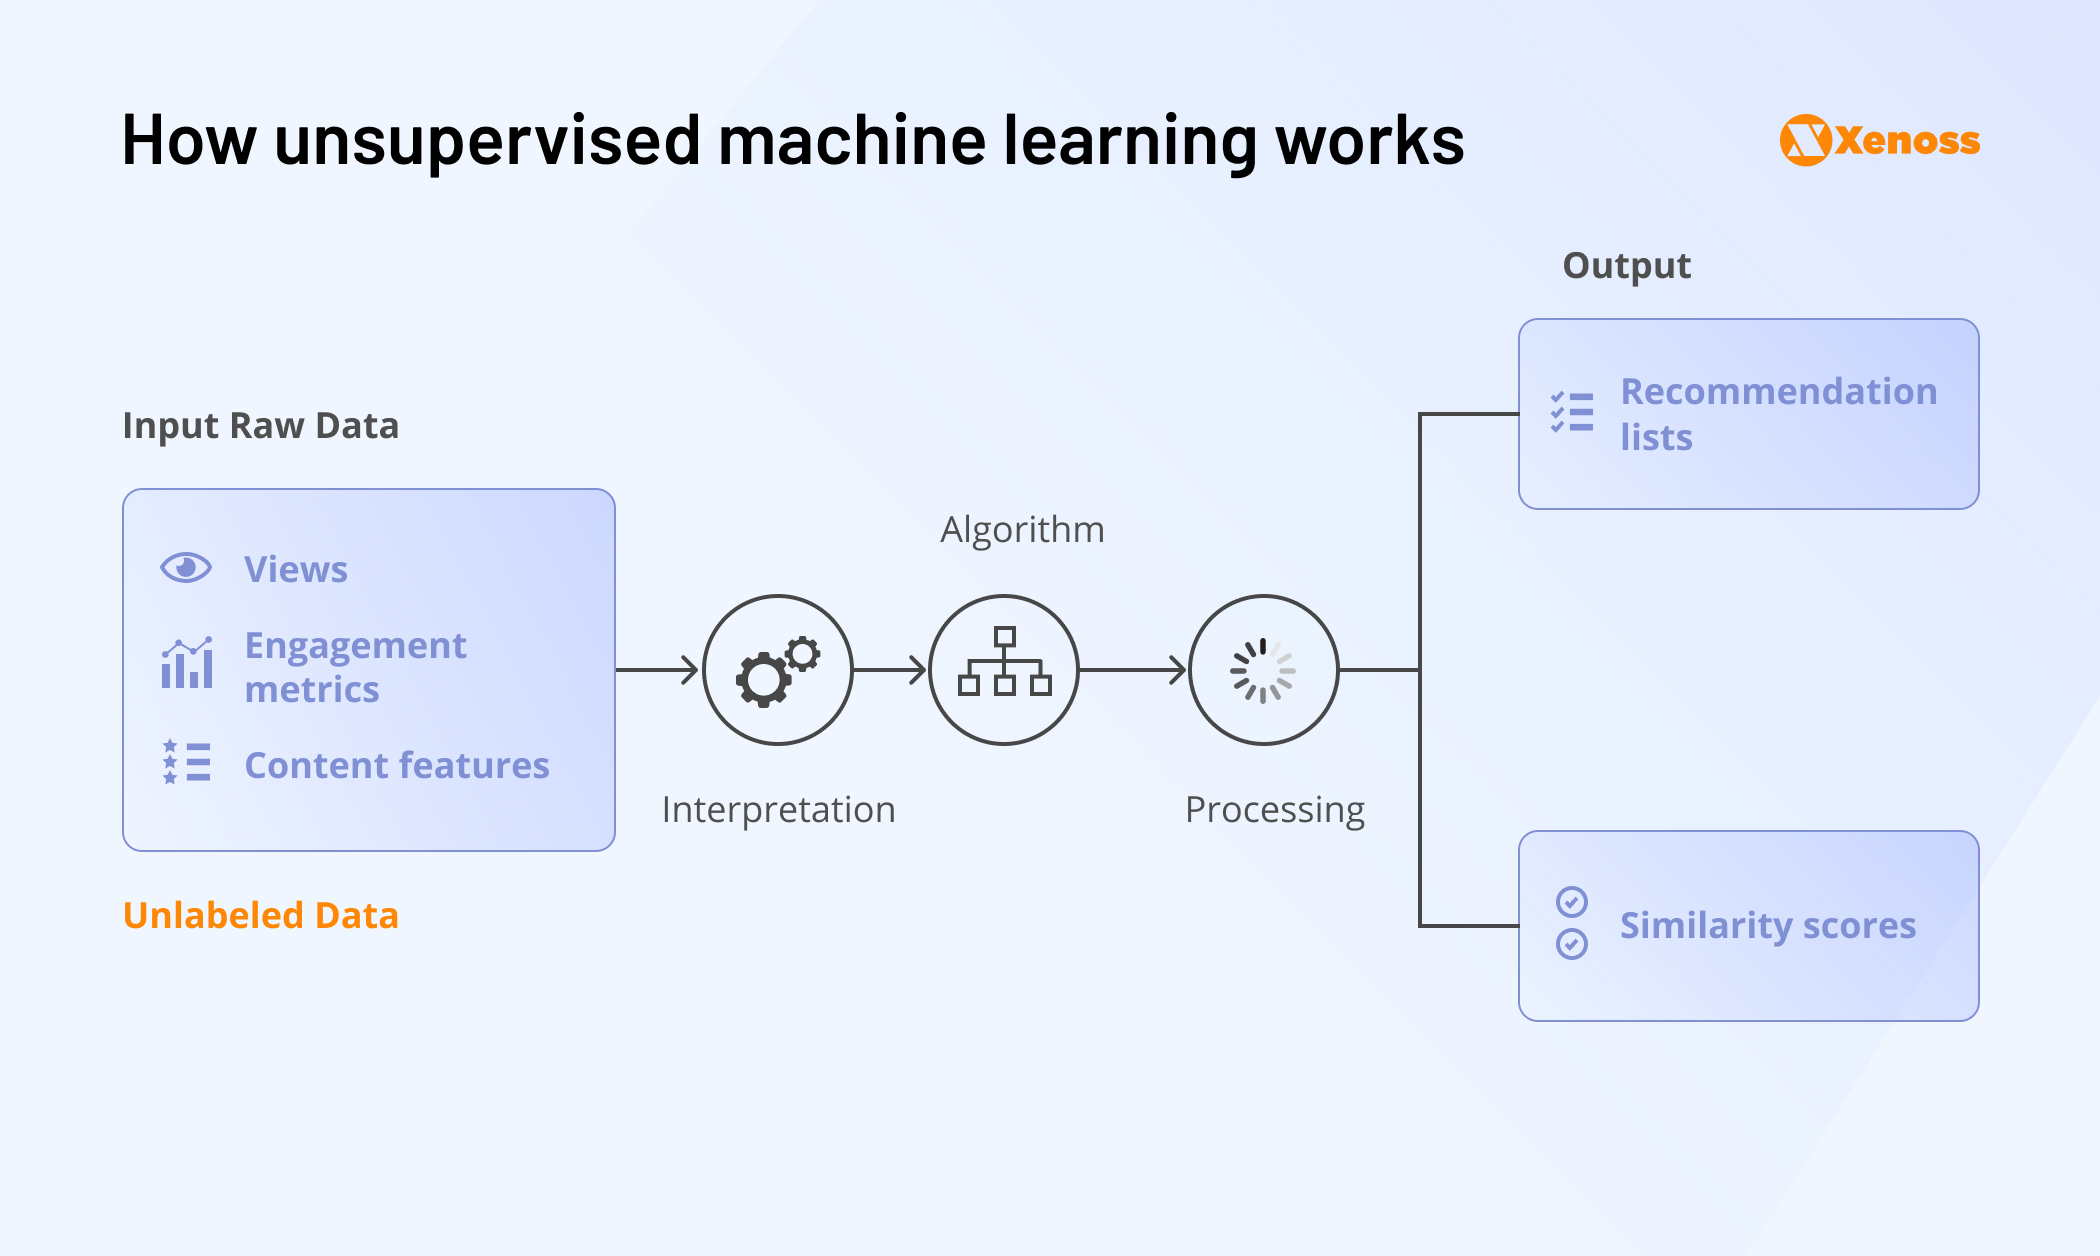 Approach to building ML models with unsupervised learning | Xenoss Blog